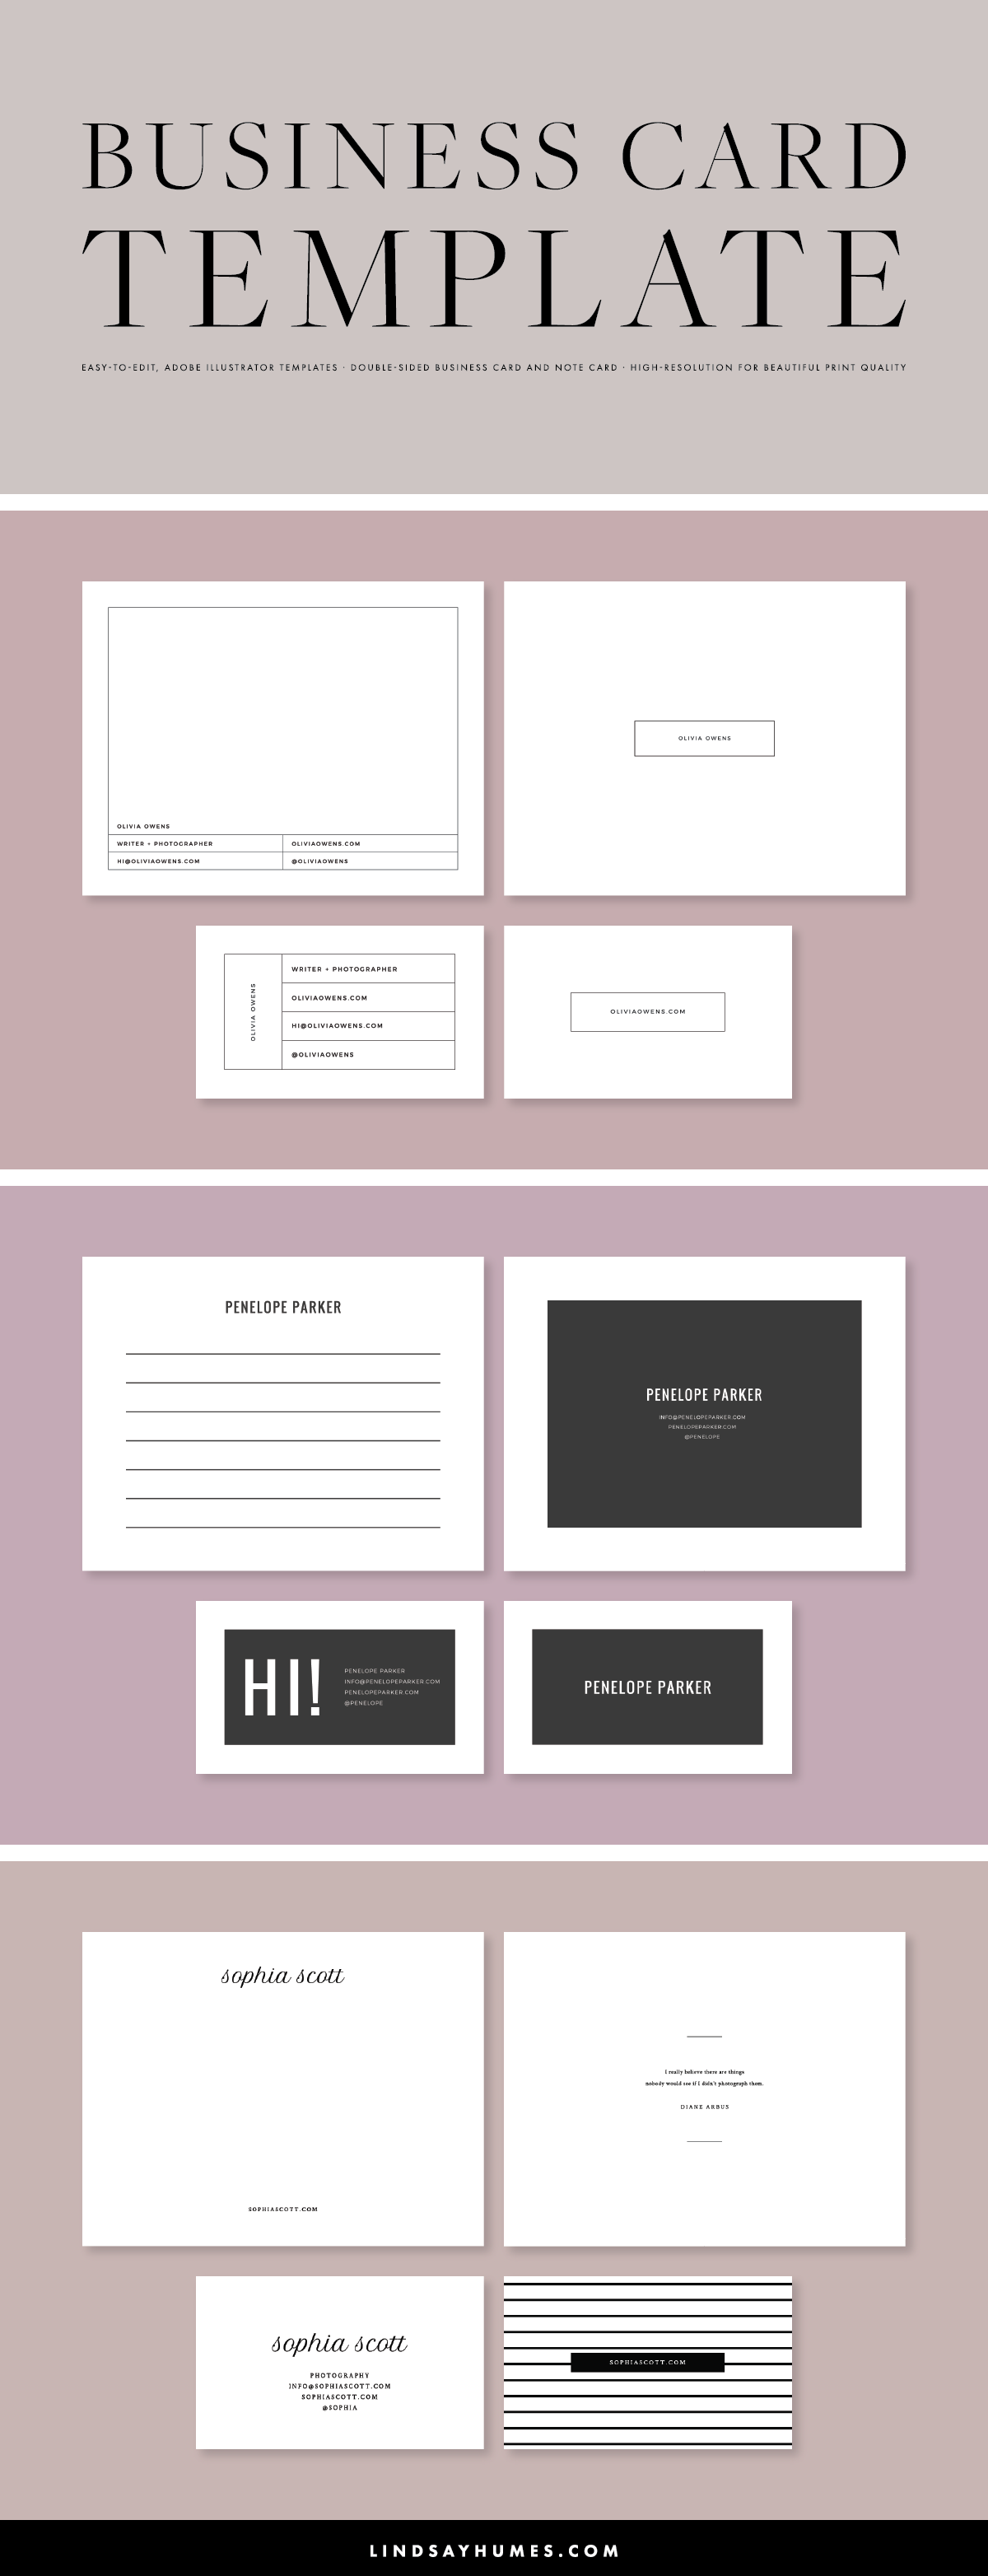 purpose of business cards 4